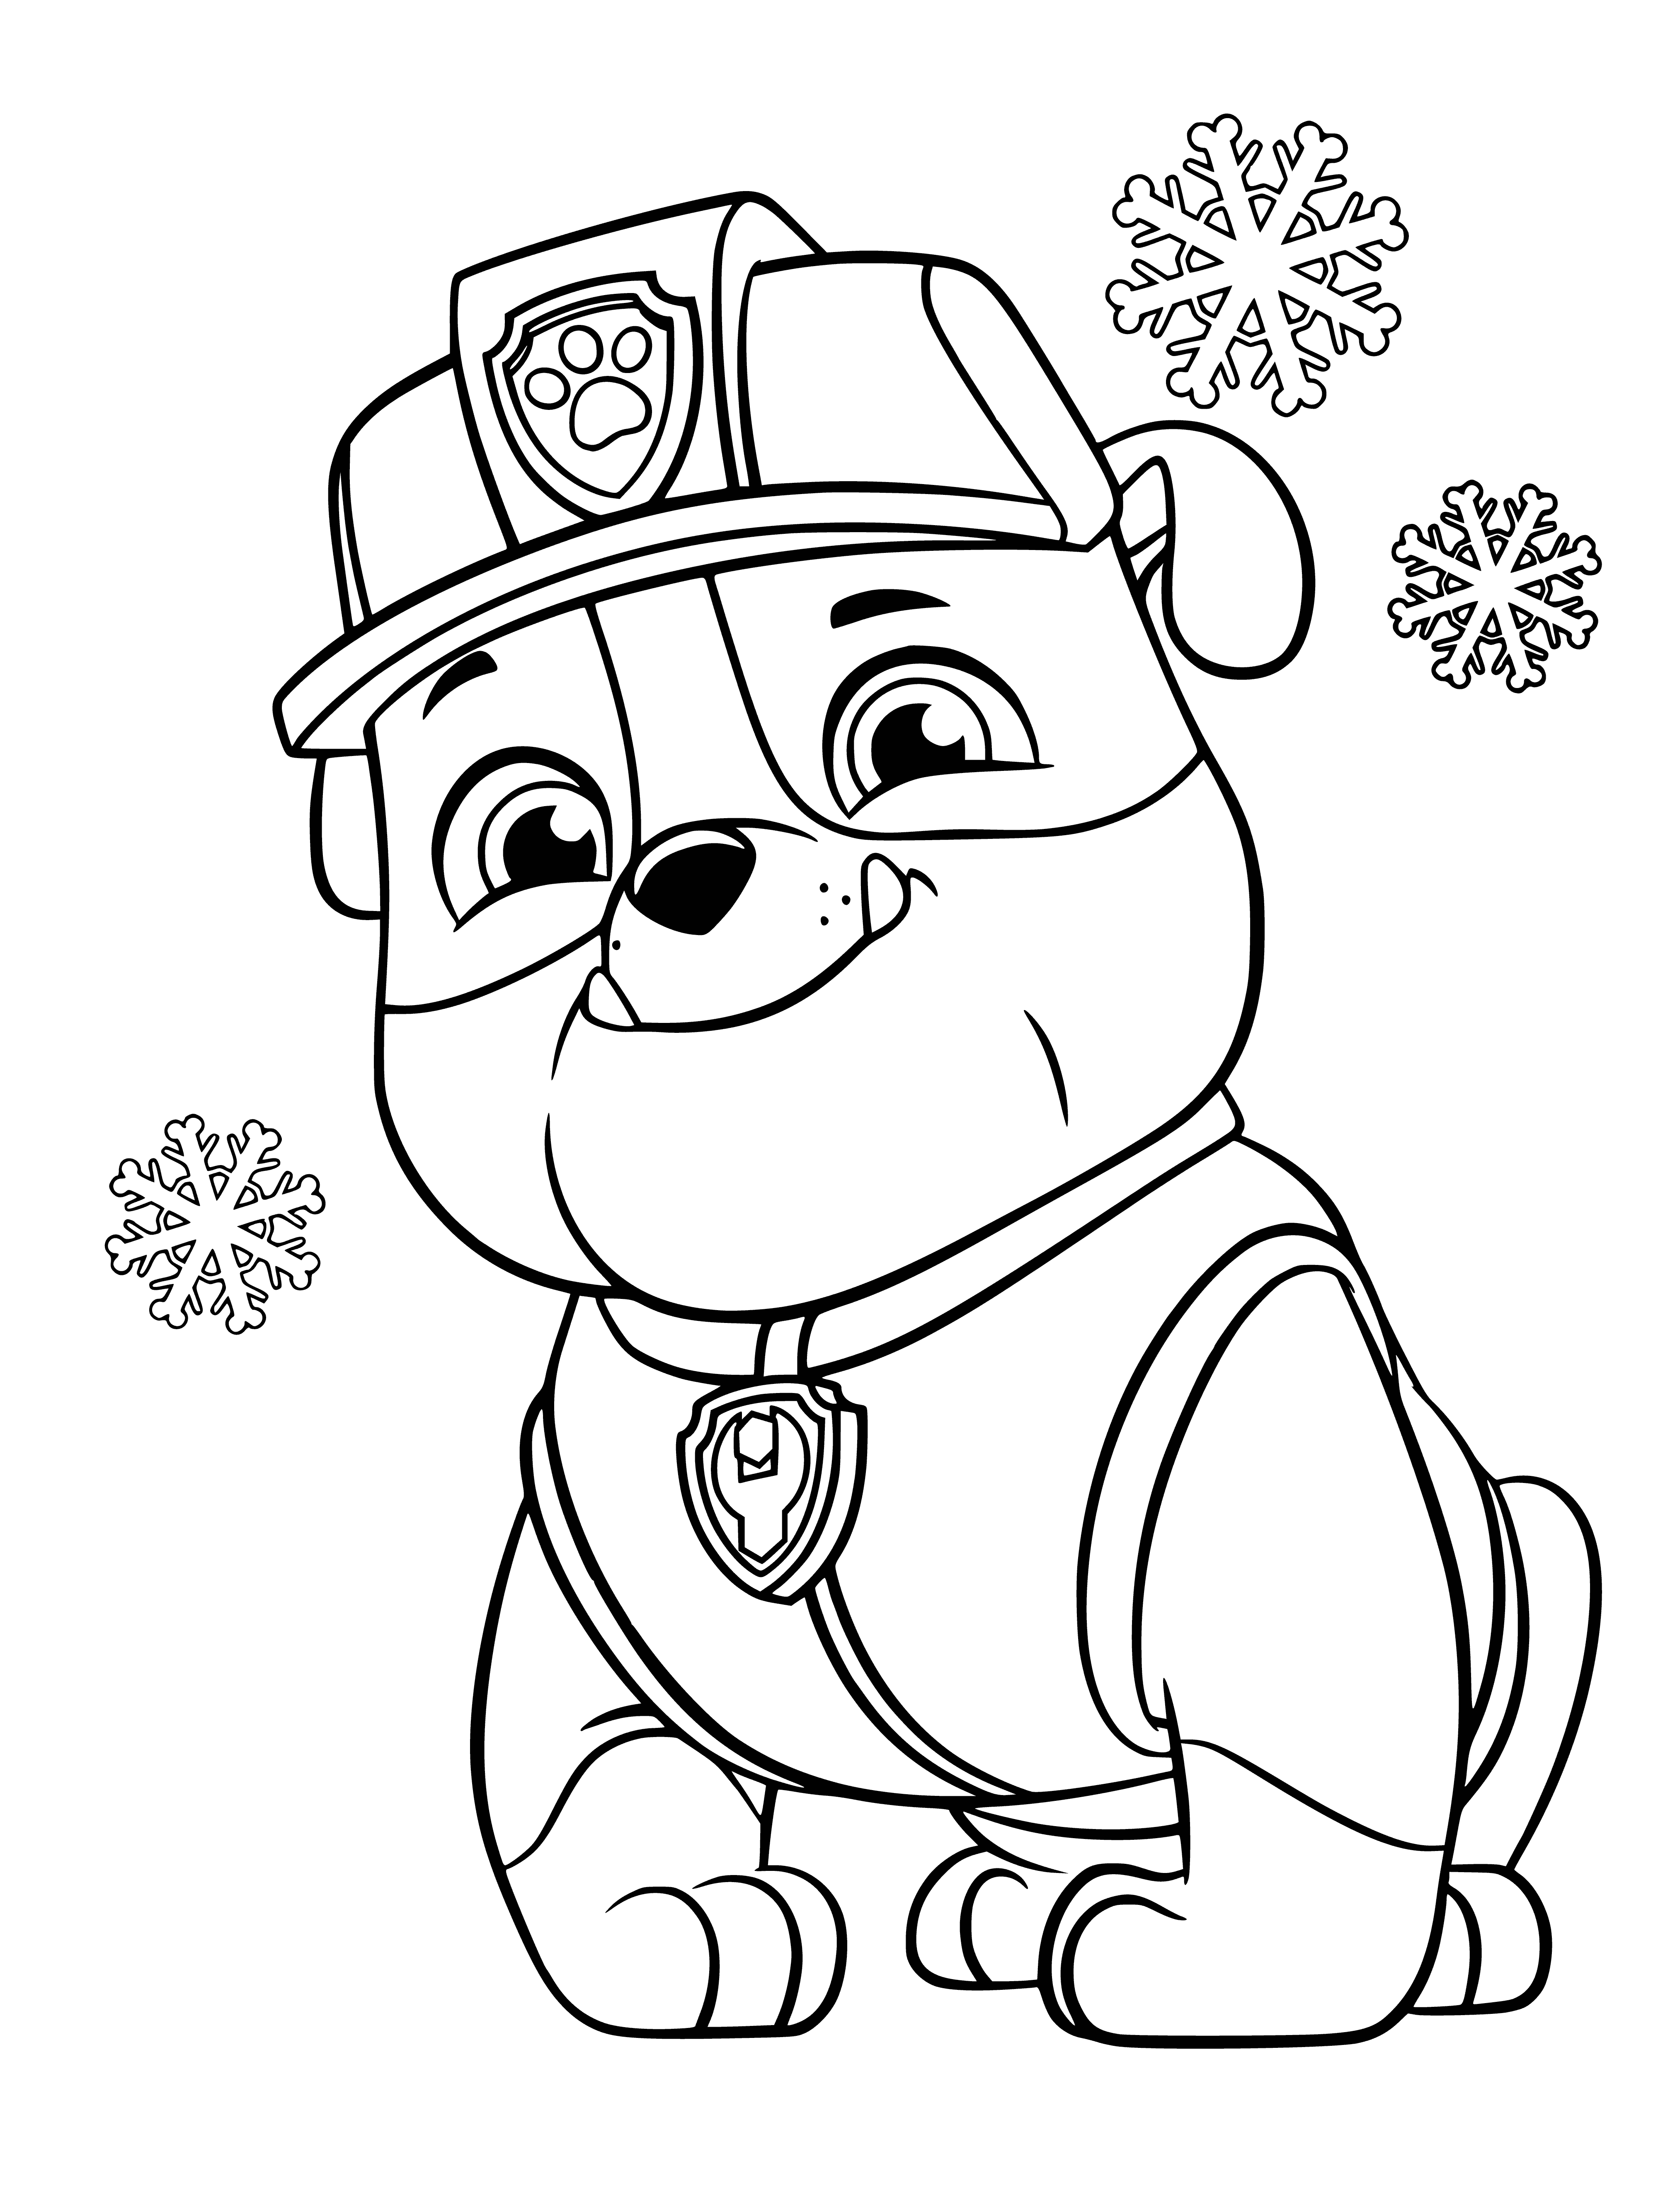 Fortress coloring page